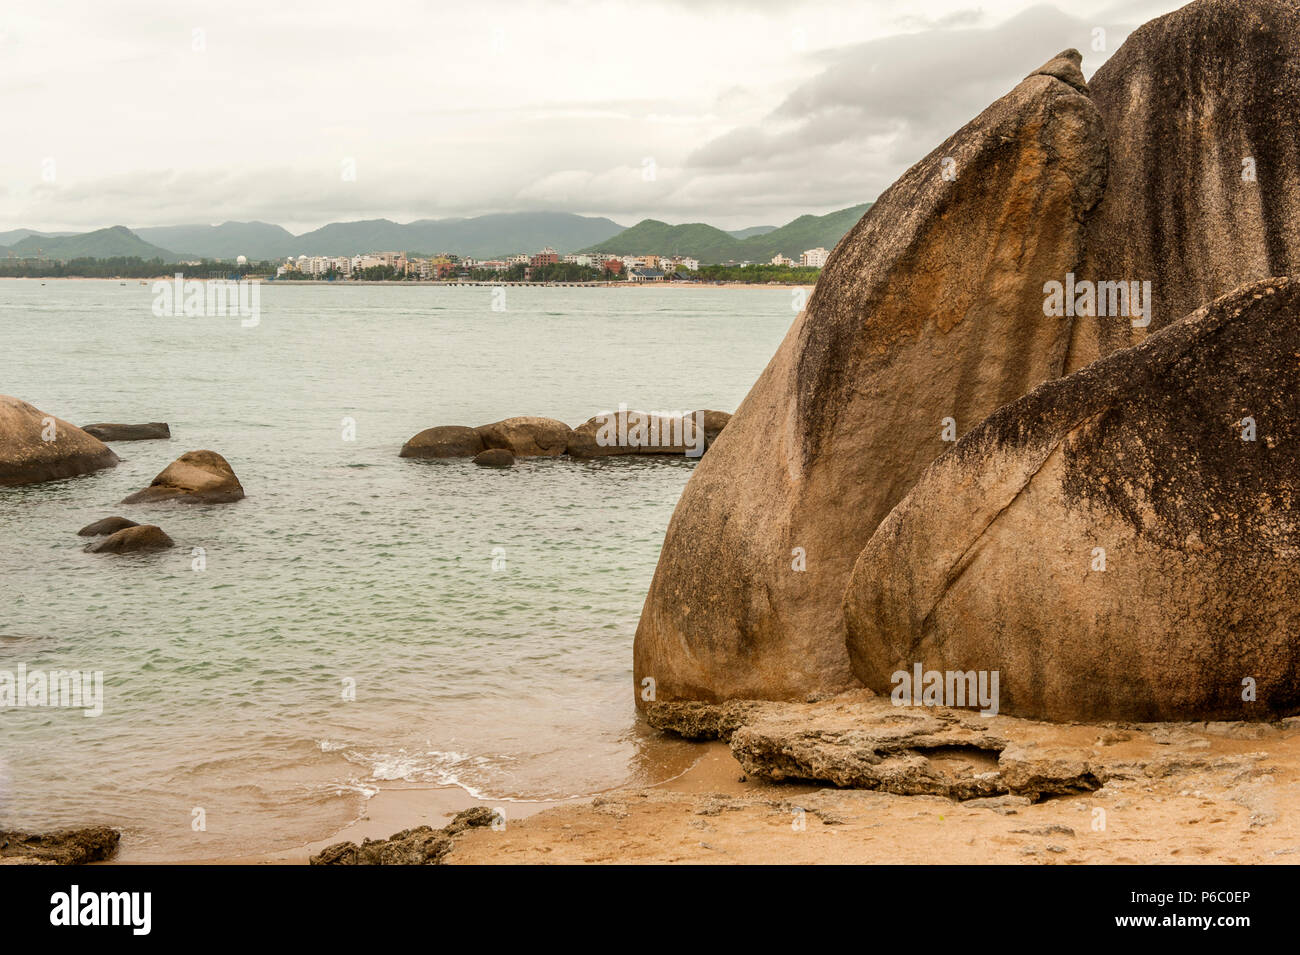 The bay of Tianya Haijaio marks to Chinese the 'end of the world'. it is bordered by huge granite rocks. Stock Photo